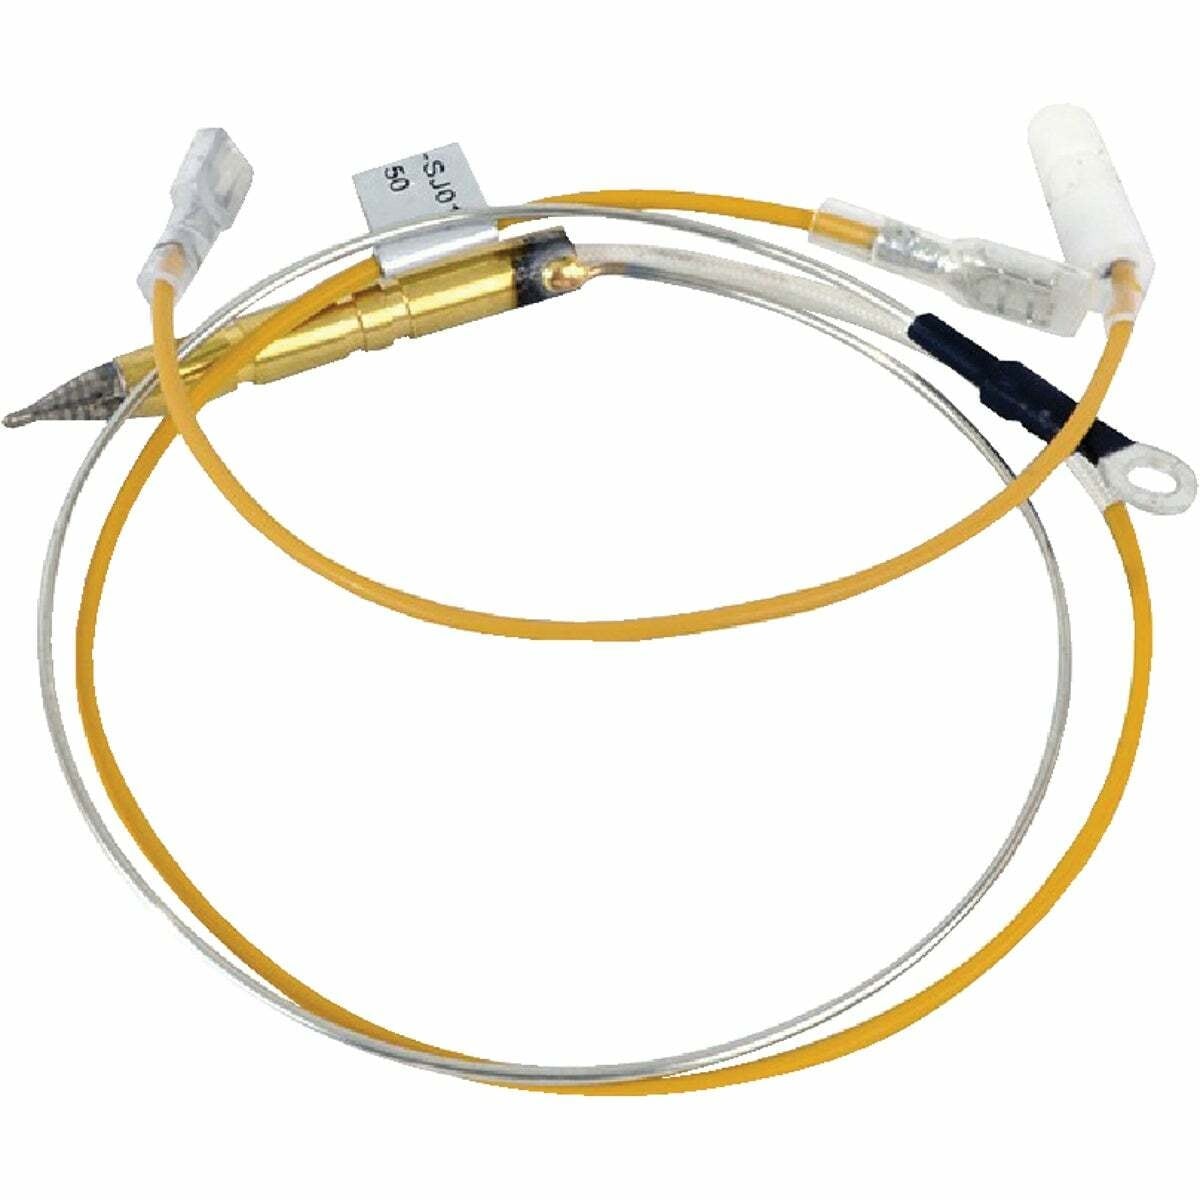 MR. HEATER 13.42 In. Replacement Thermocouple - 1 Each